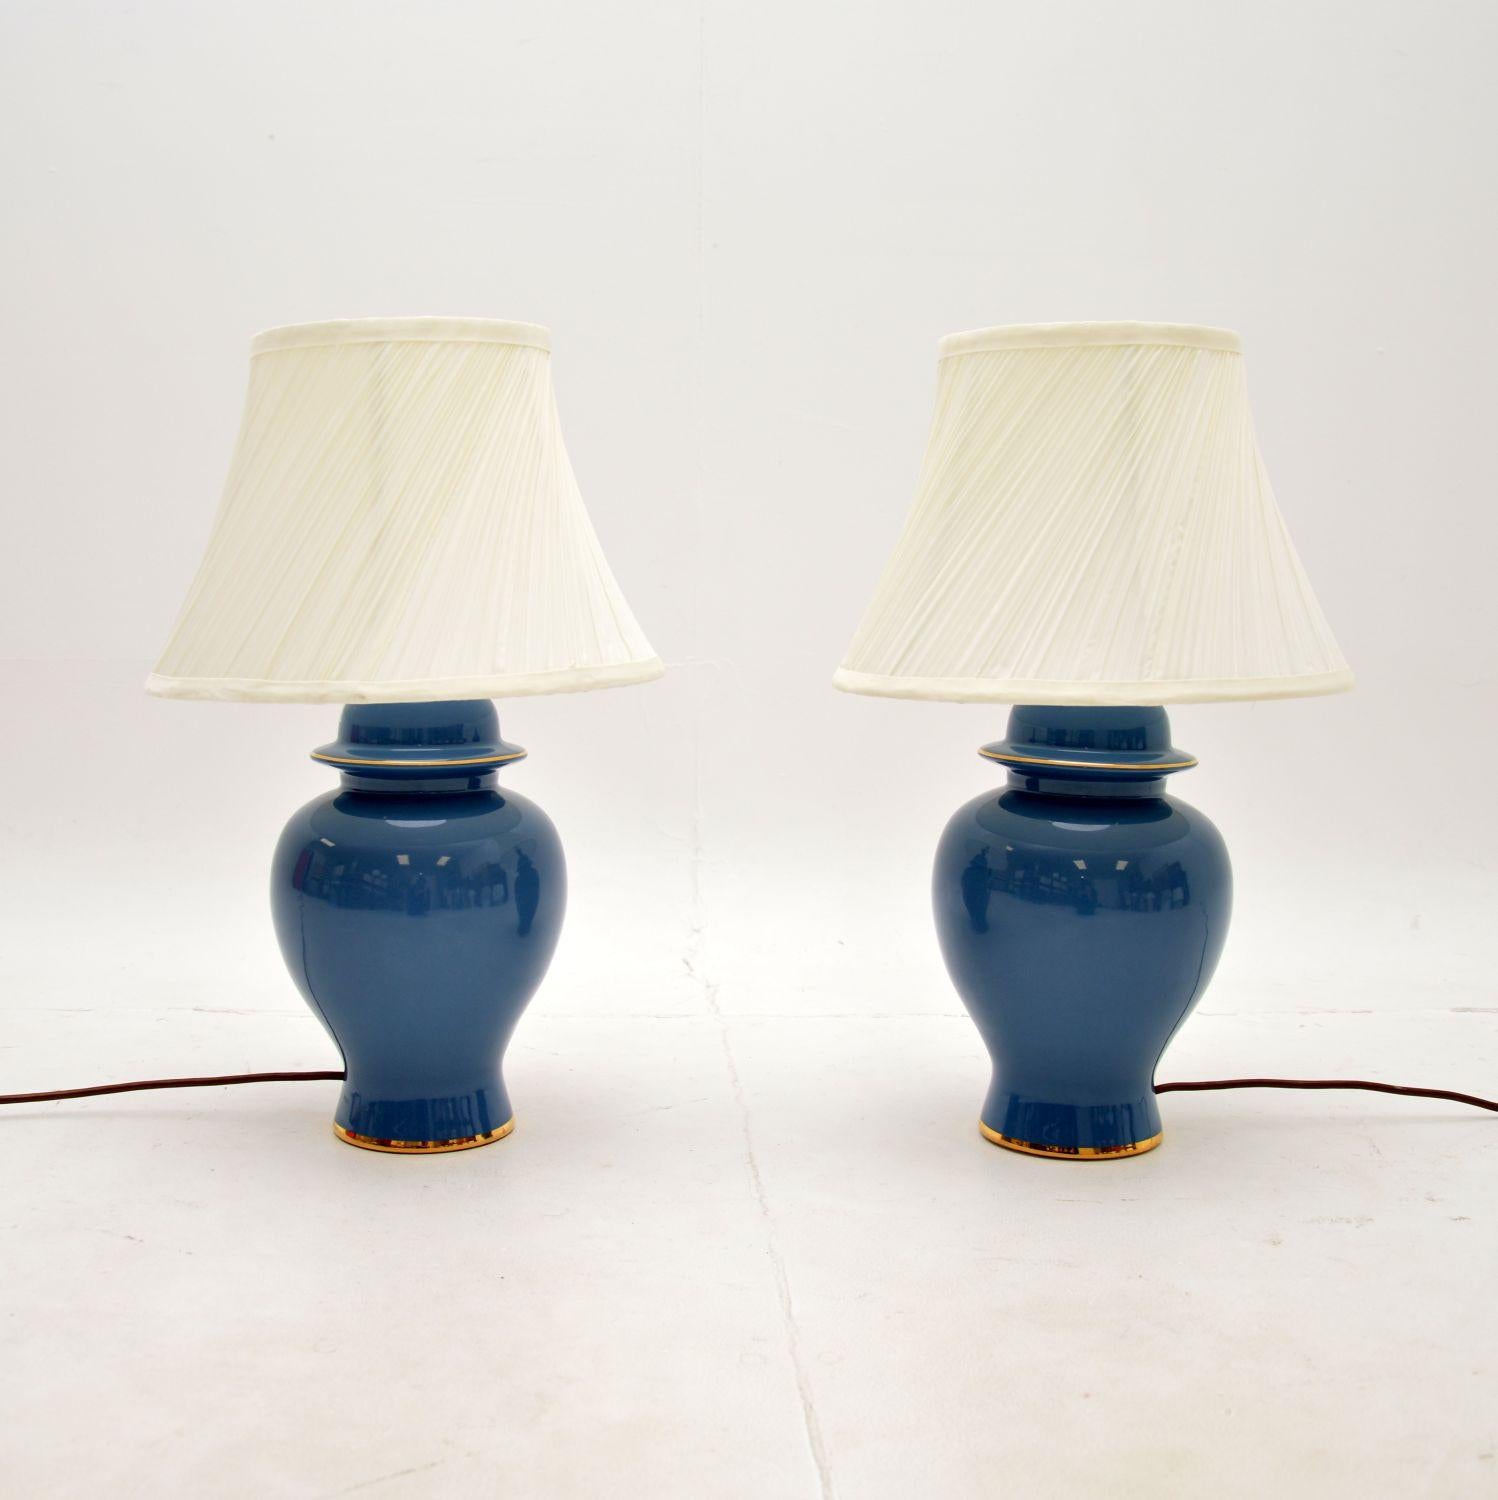 A stylish and very well made pair of vintage ceramic table lamps. They were made in England, they date from around the 1970’s.

The quality is superb, they are a lovely size and have a gorgeous light blue glaze, with gold trim.

The condition is